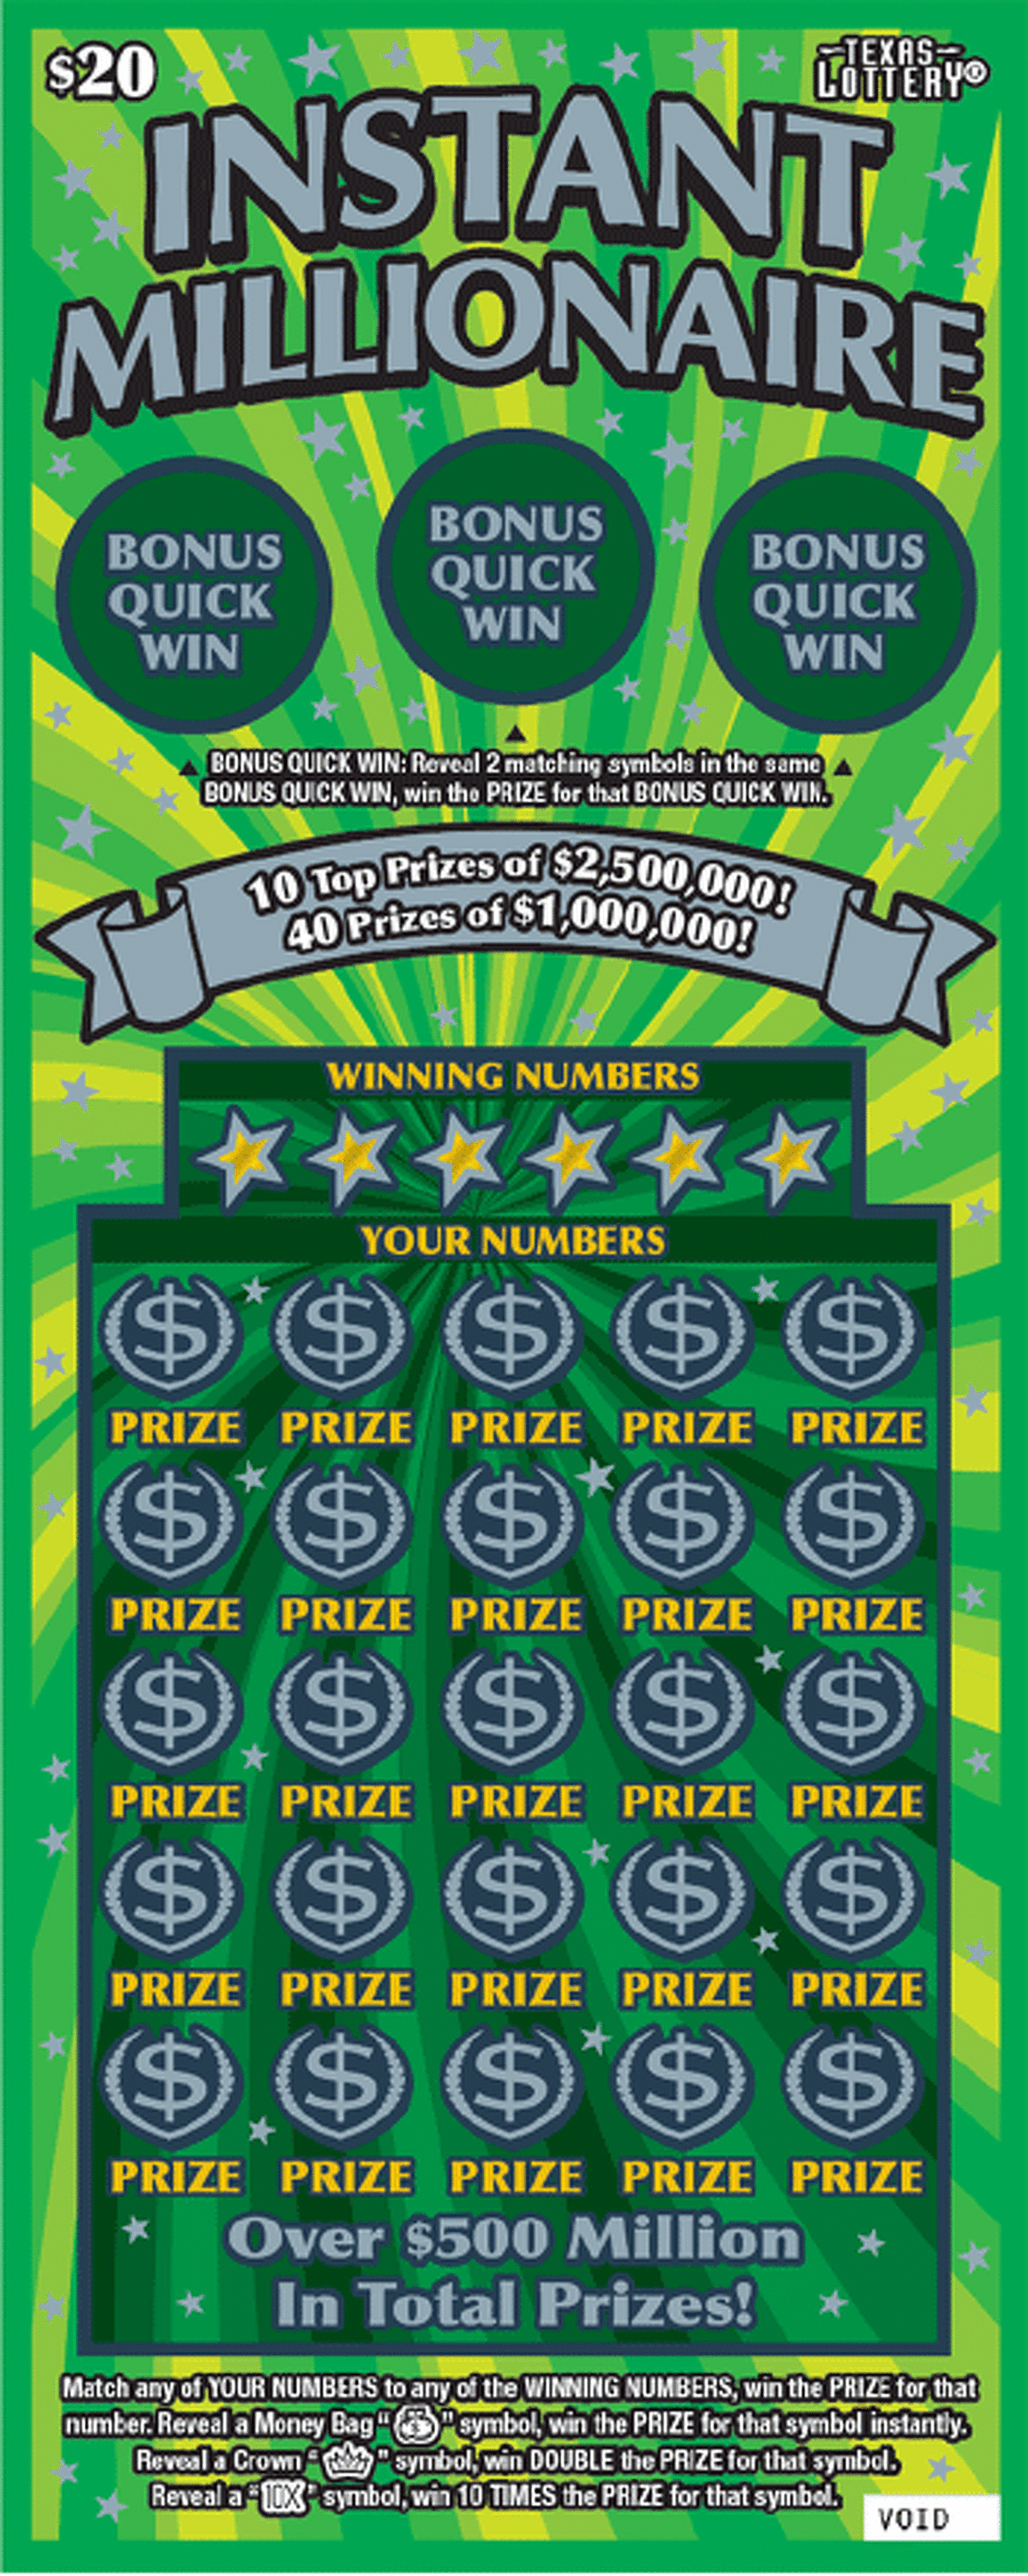 For the third time in two weeks, a San Antonio-area resident has won the Texas Lottery's "Instant Millionaire" scratch off game.